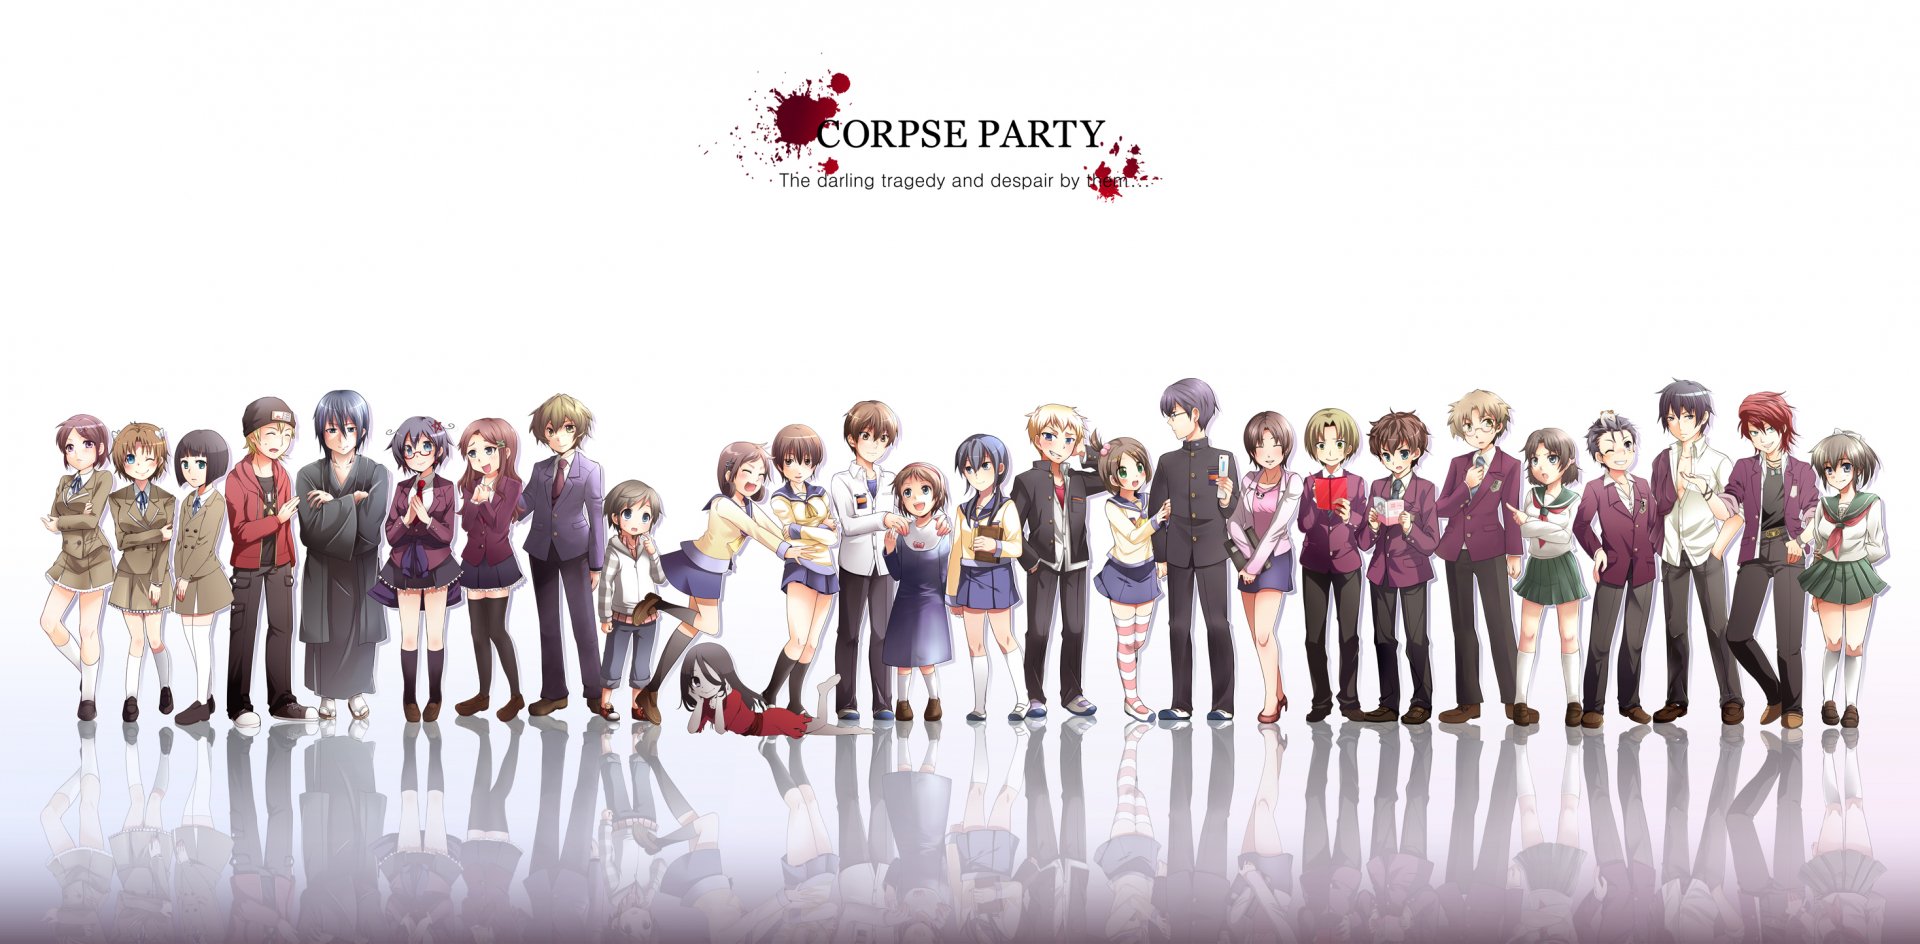 10 Corpse Party Hd Wallpapers Background Images